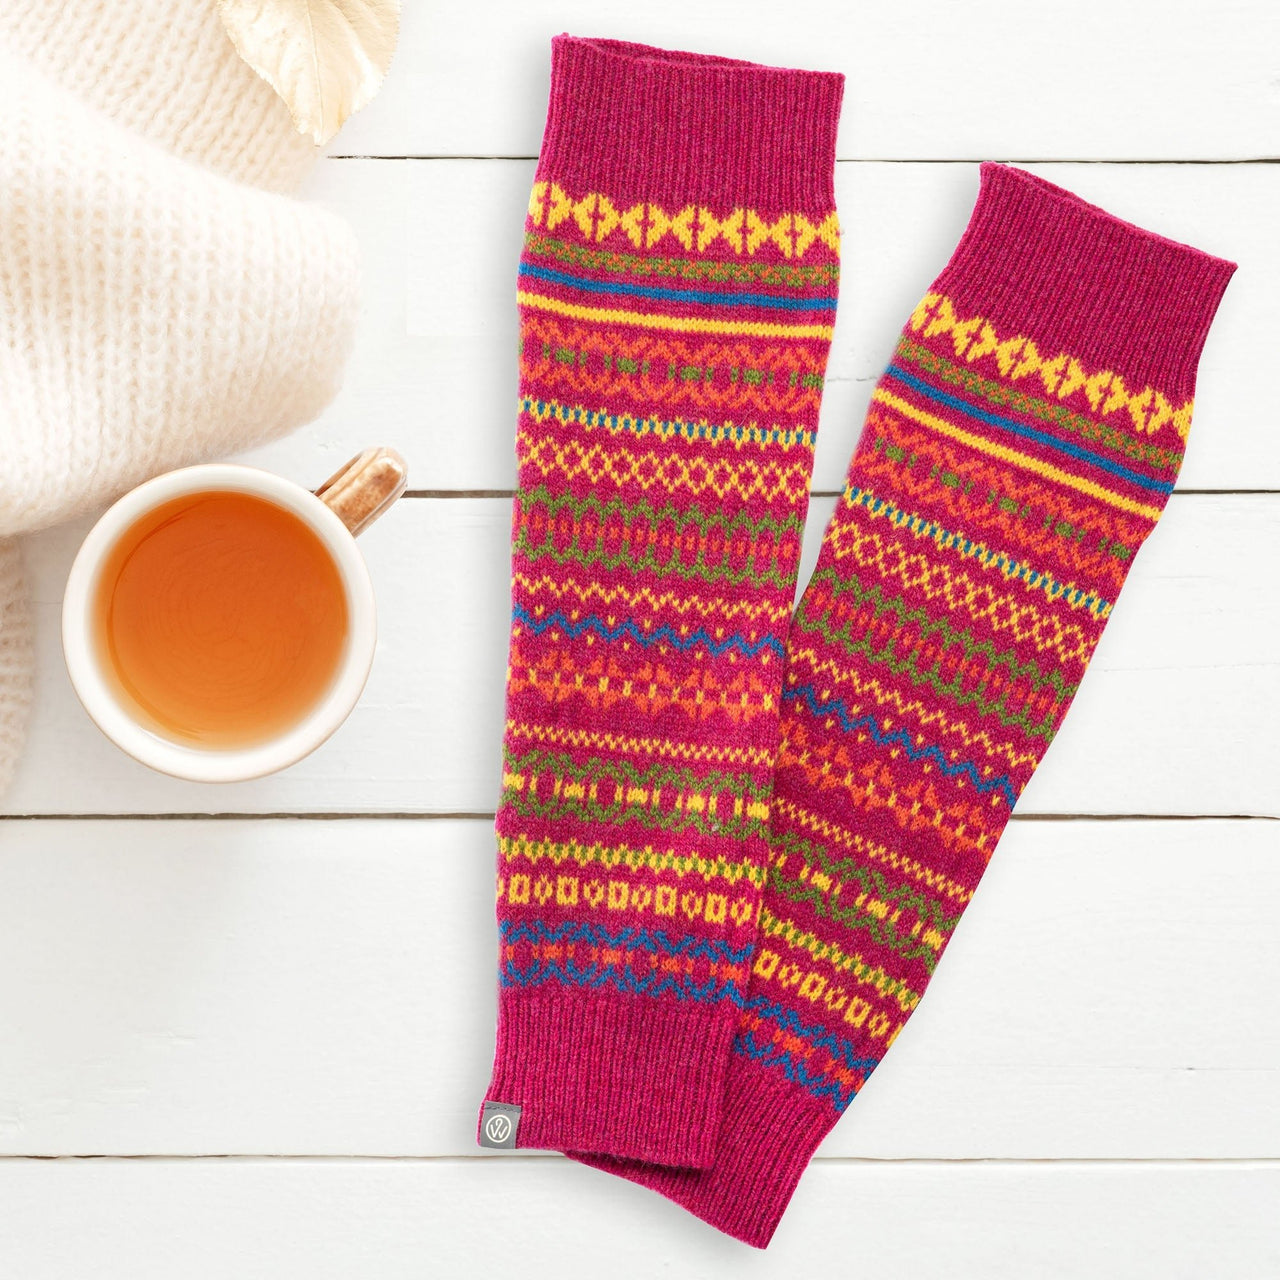 Lambswool Knit Fair Isle Sustainable Arm Warmers - Made Scotland